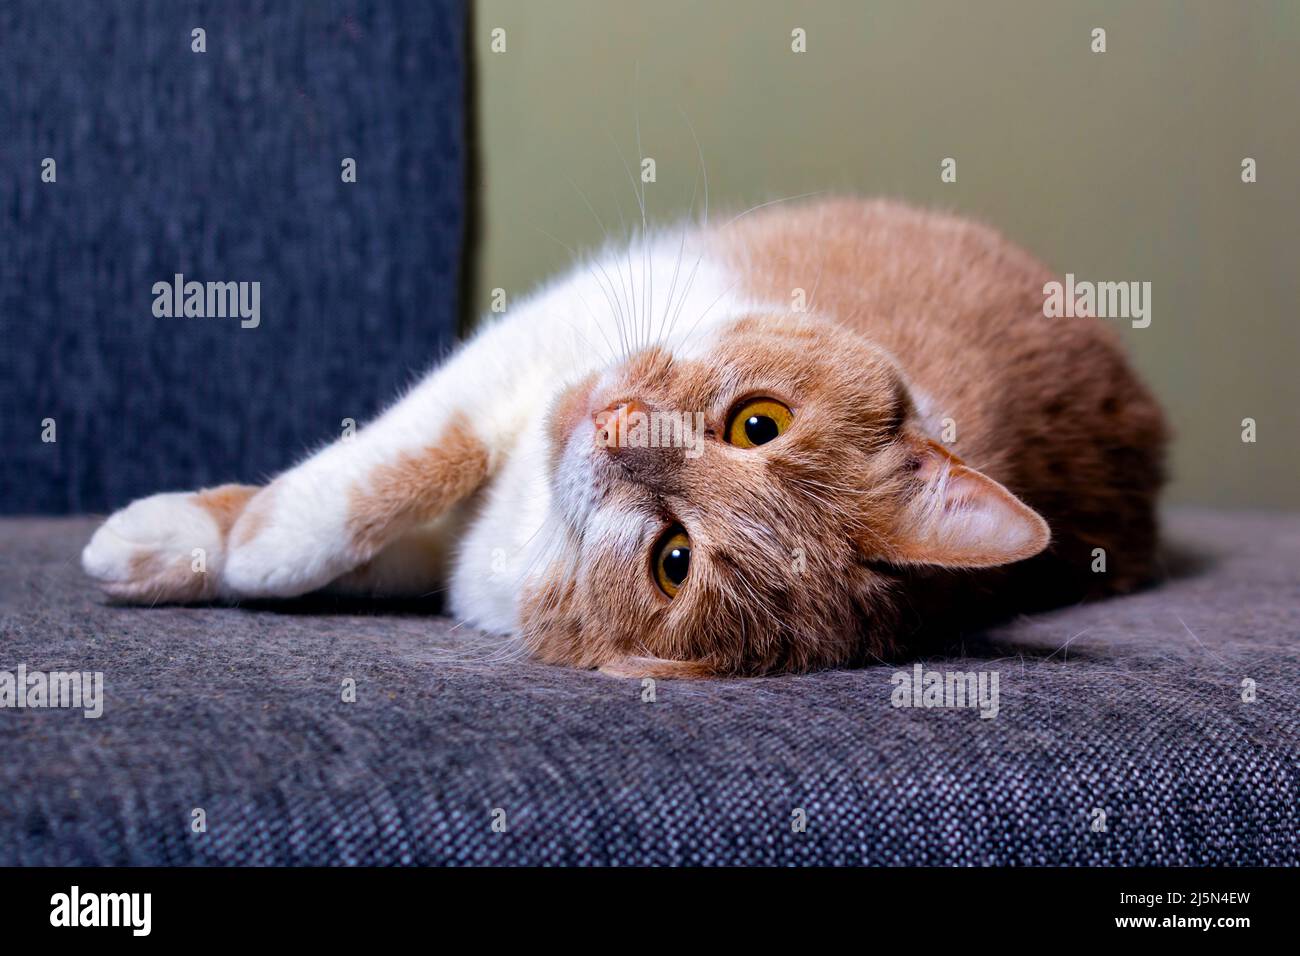 Ginger cat's hair on furniture. Cat shedding.  Stock Photo